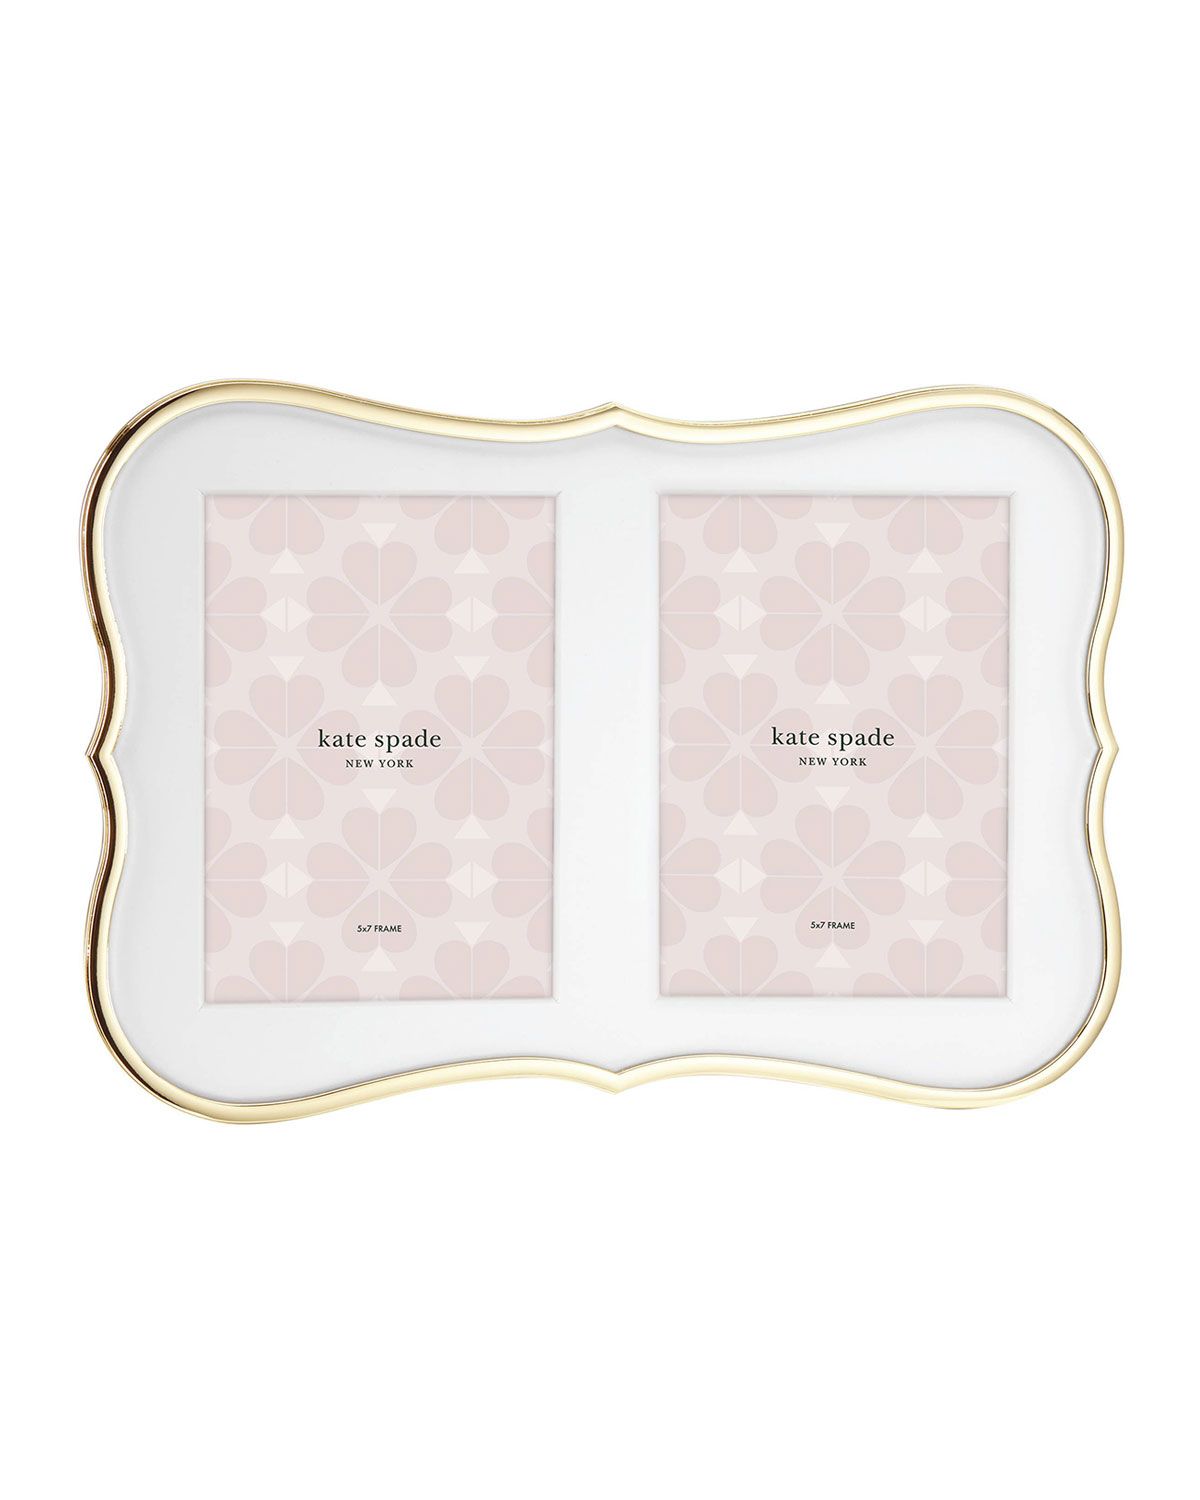 crown point double invitation picture frame | Horchow